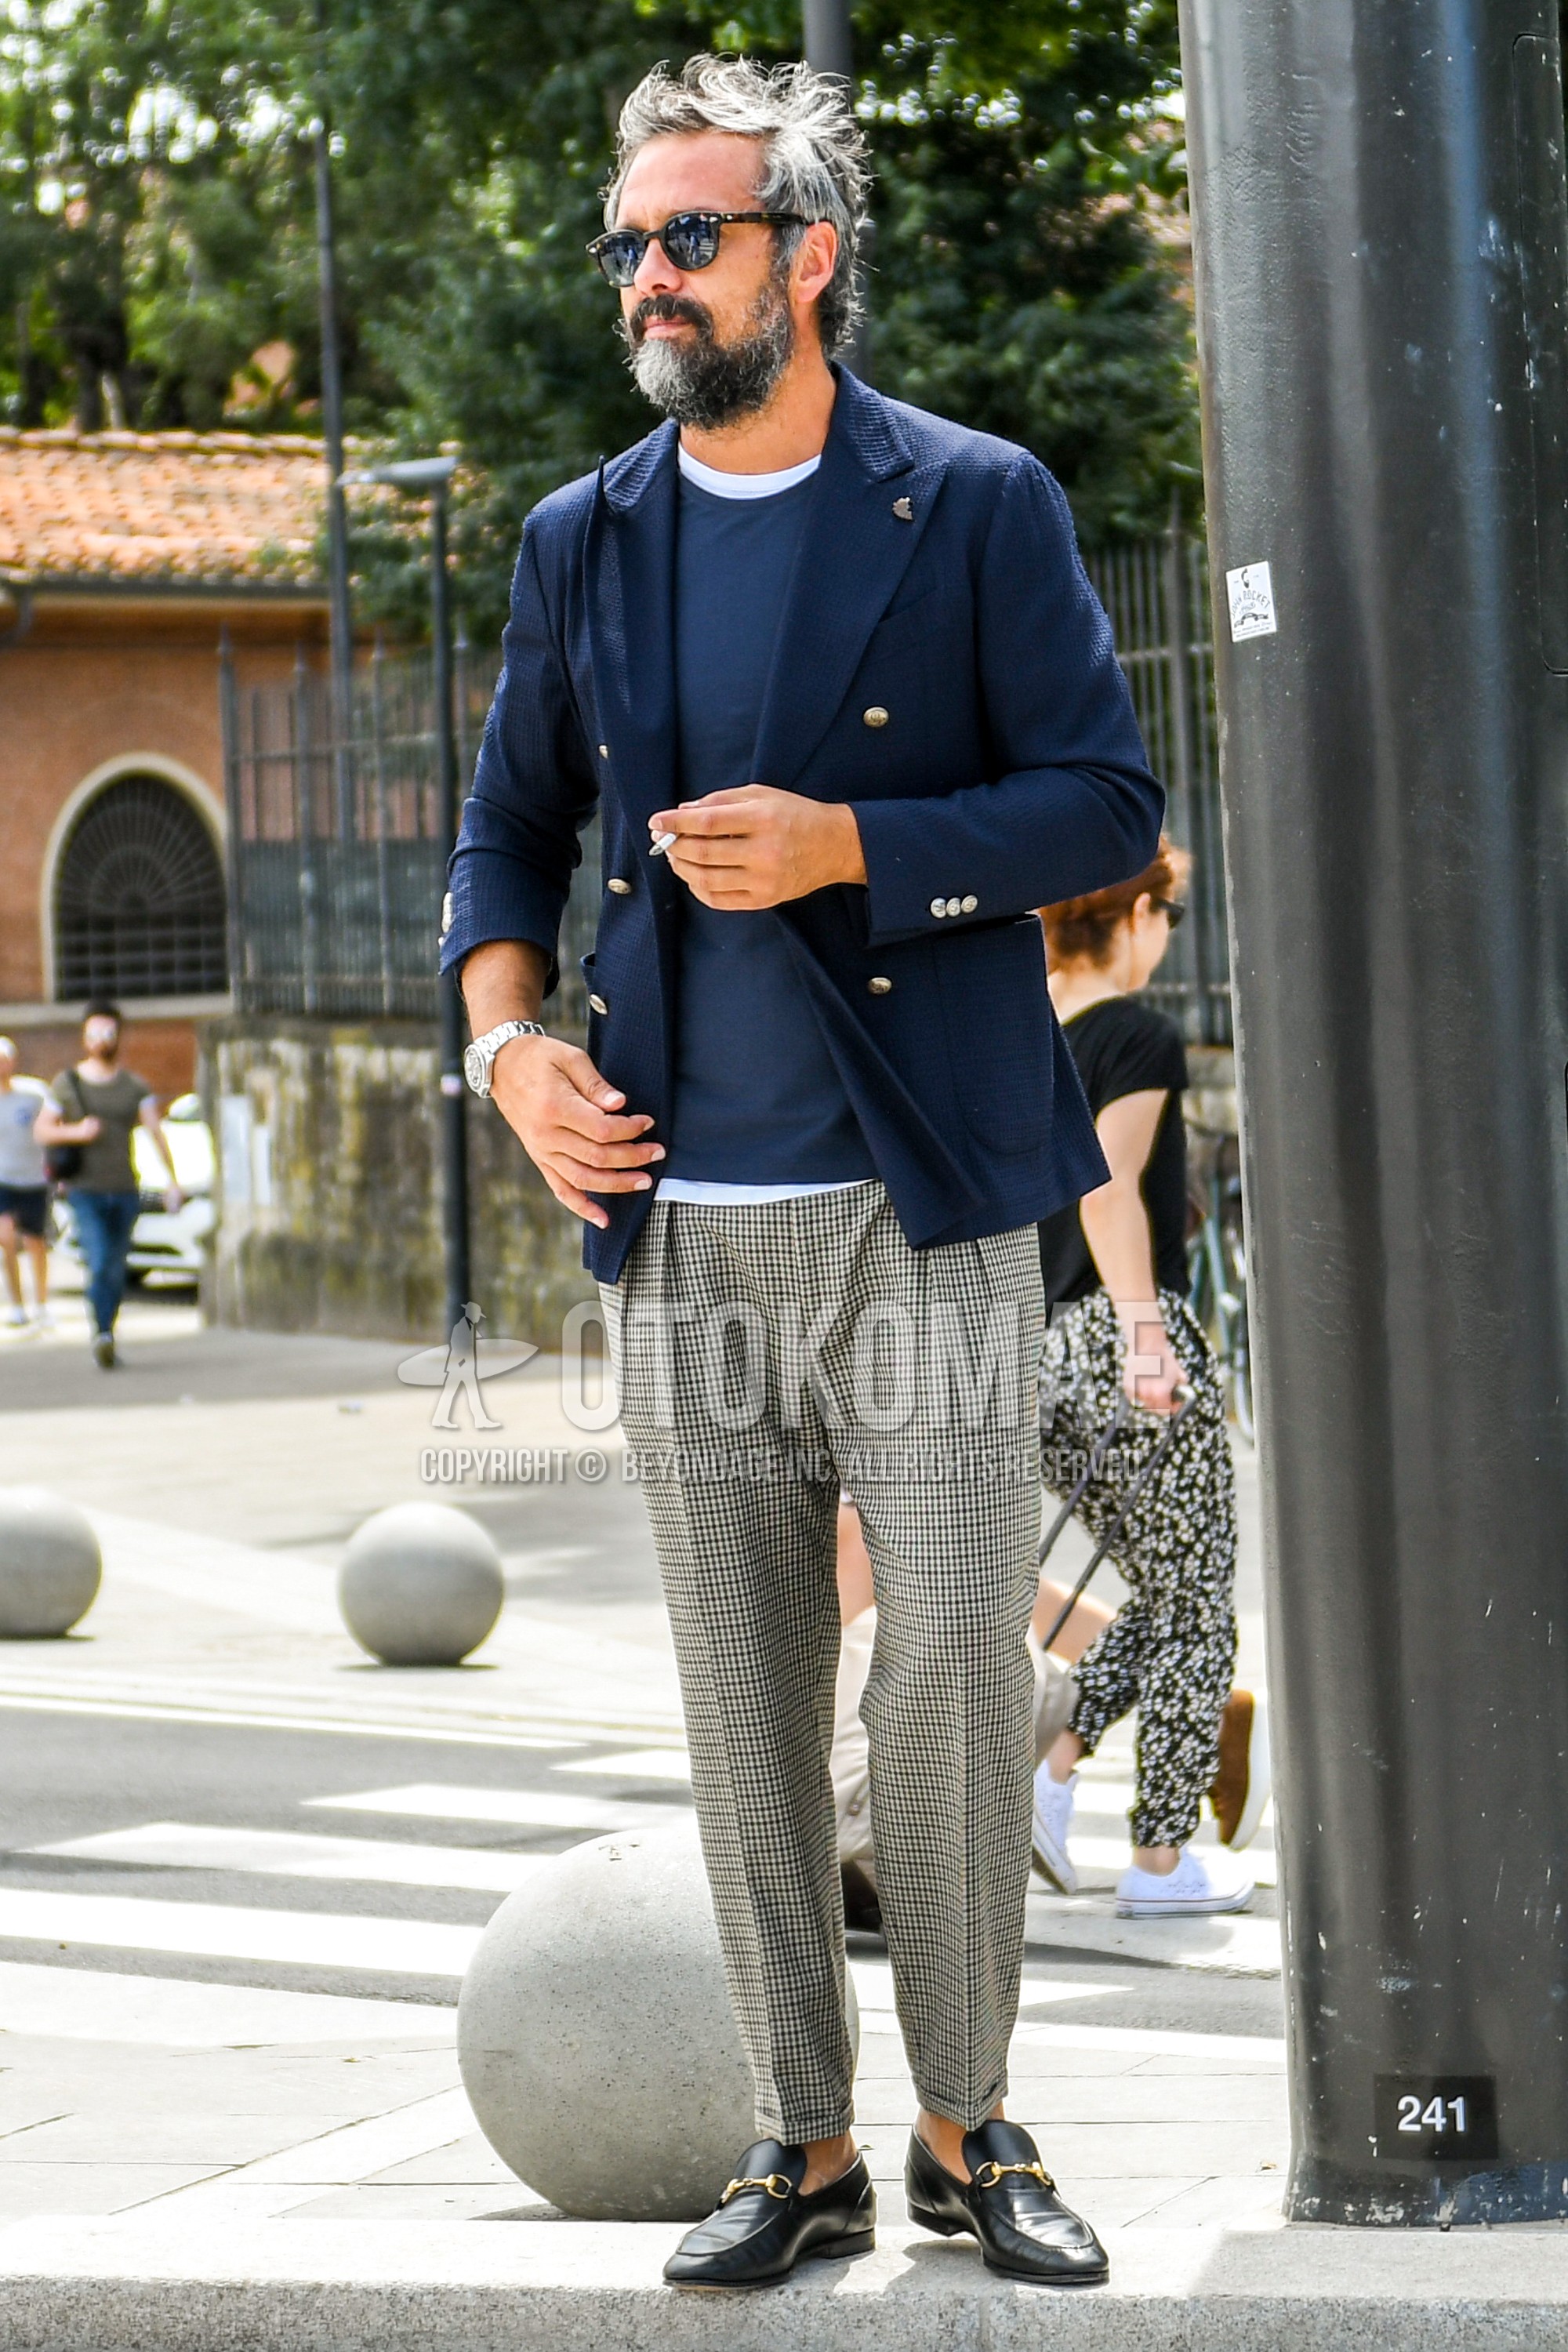 Men's spring summer autumn outfit with plain sunglasses, navy plain tailored jacket, navy plain t-shirt, white plain t-shirt, gray check ankle pants, gray check pleated pants, black bit loafers leather shoes.